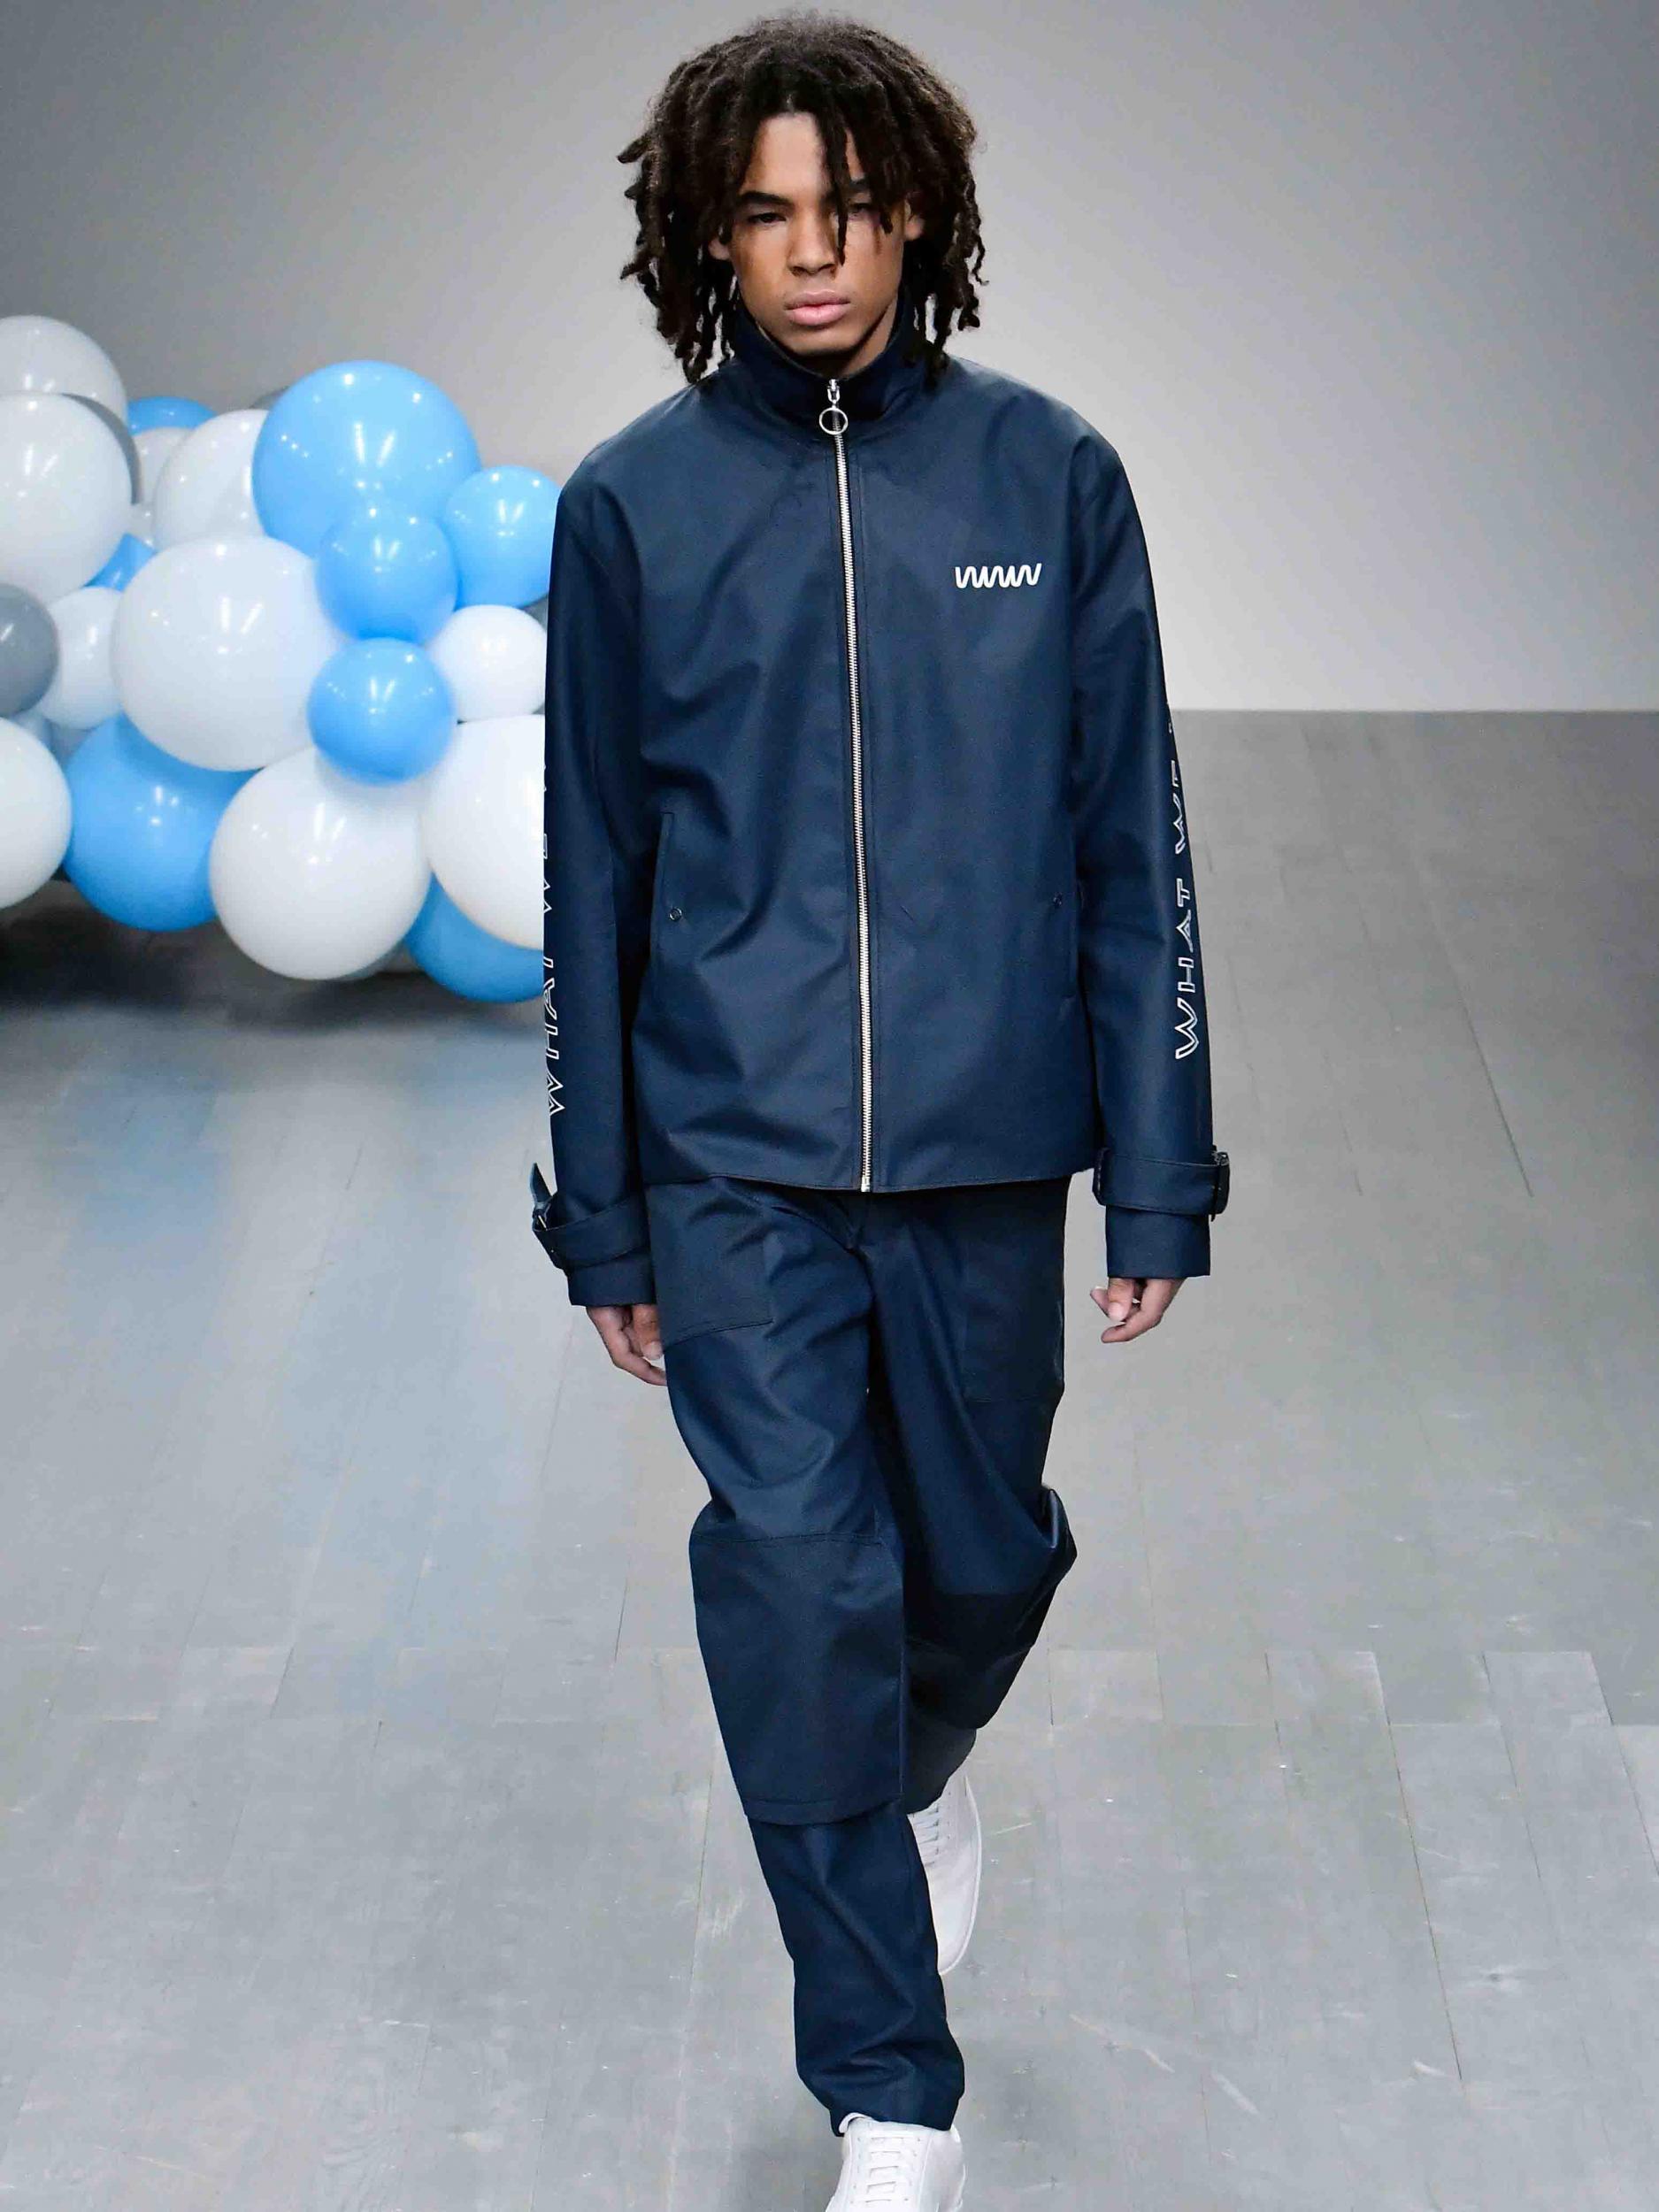 Tinie Tempah’s brand is know for tracksuits